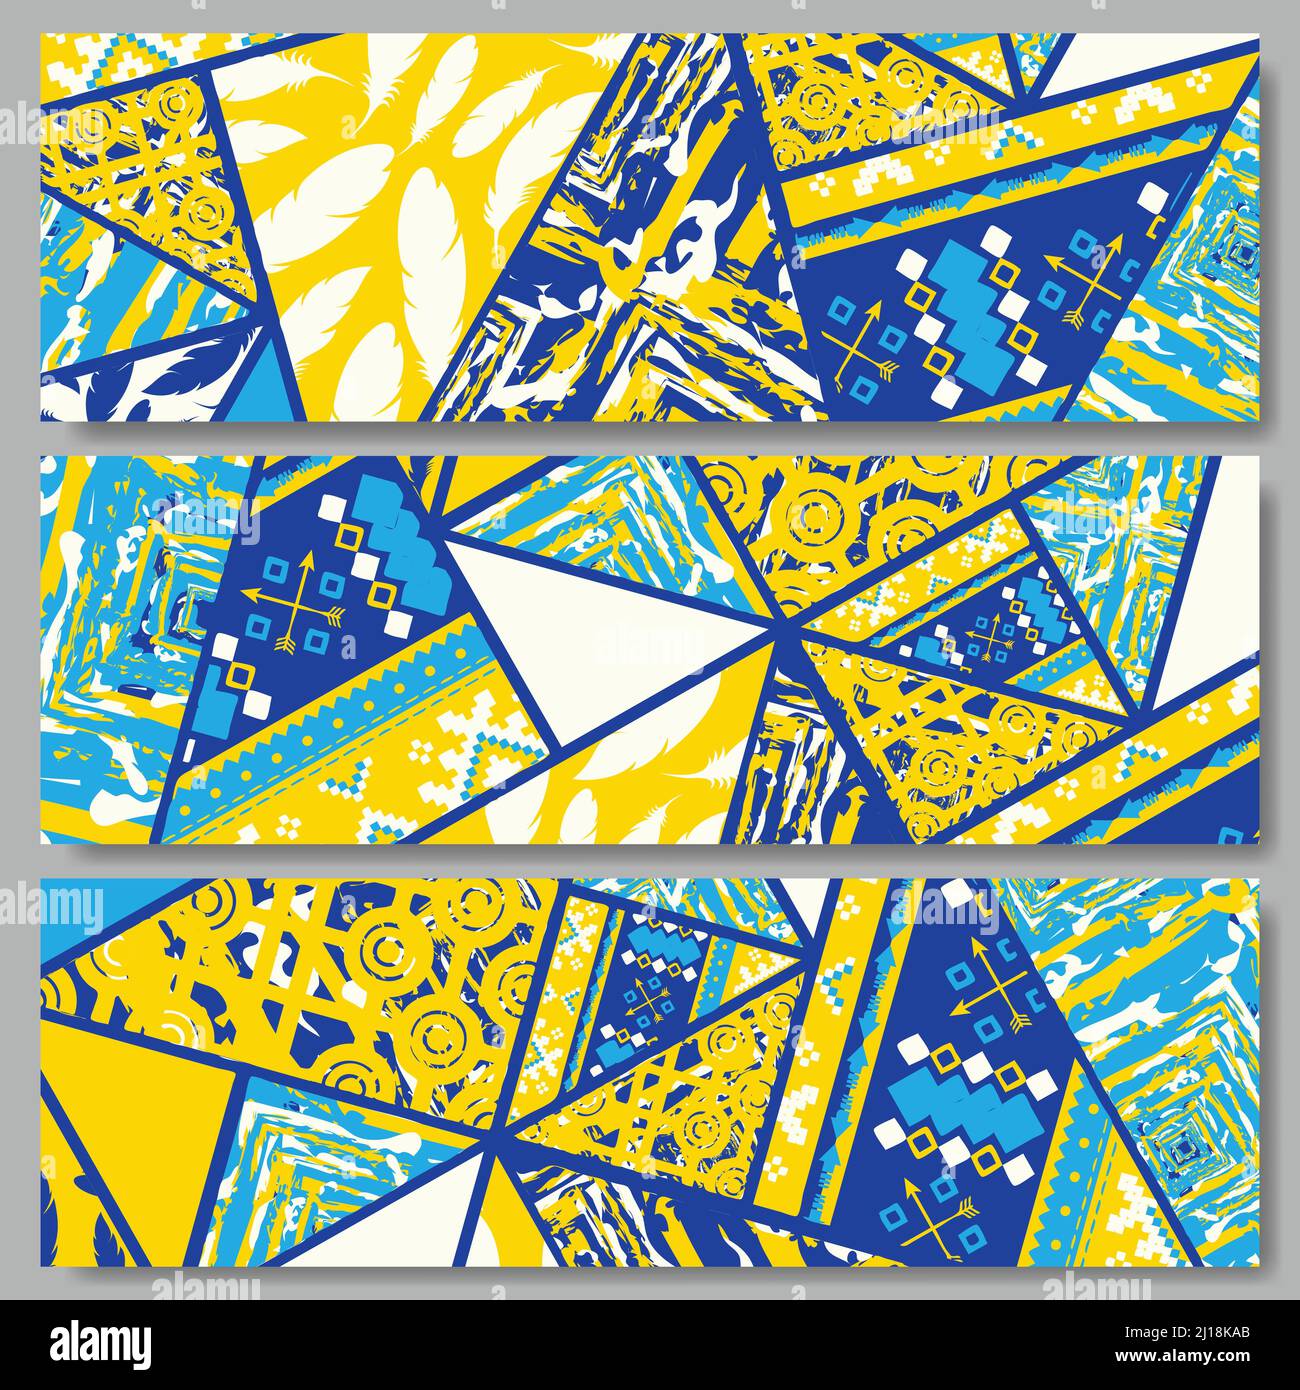 Yellow and blue grunge banners set Stock Vector